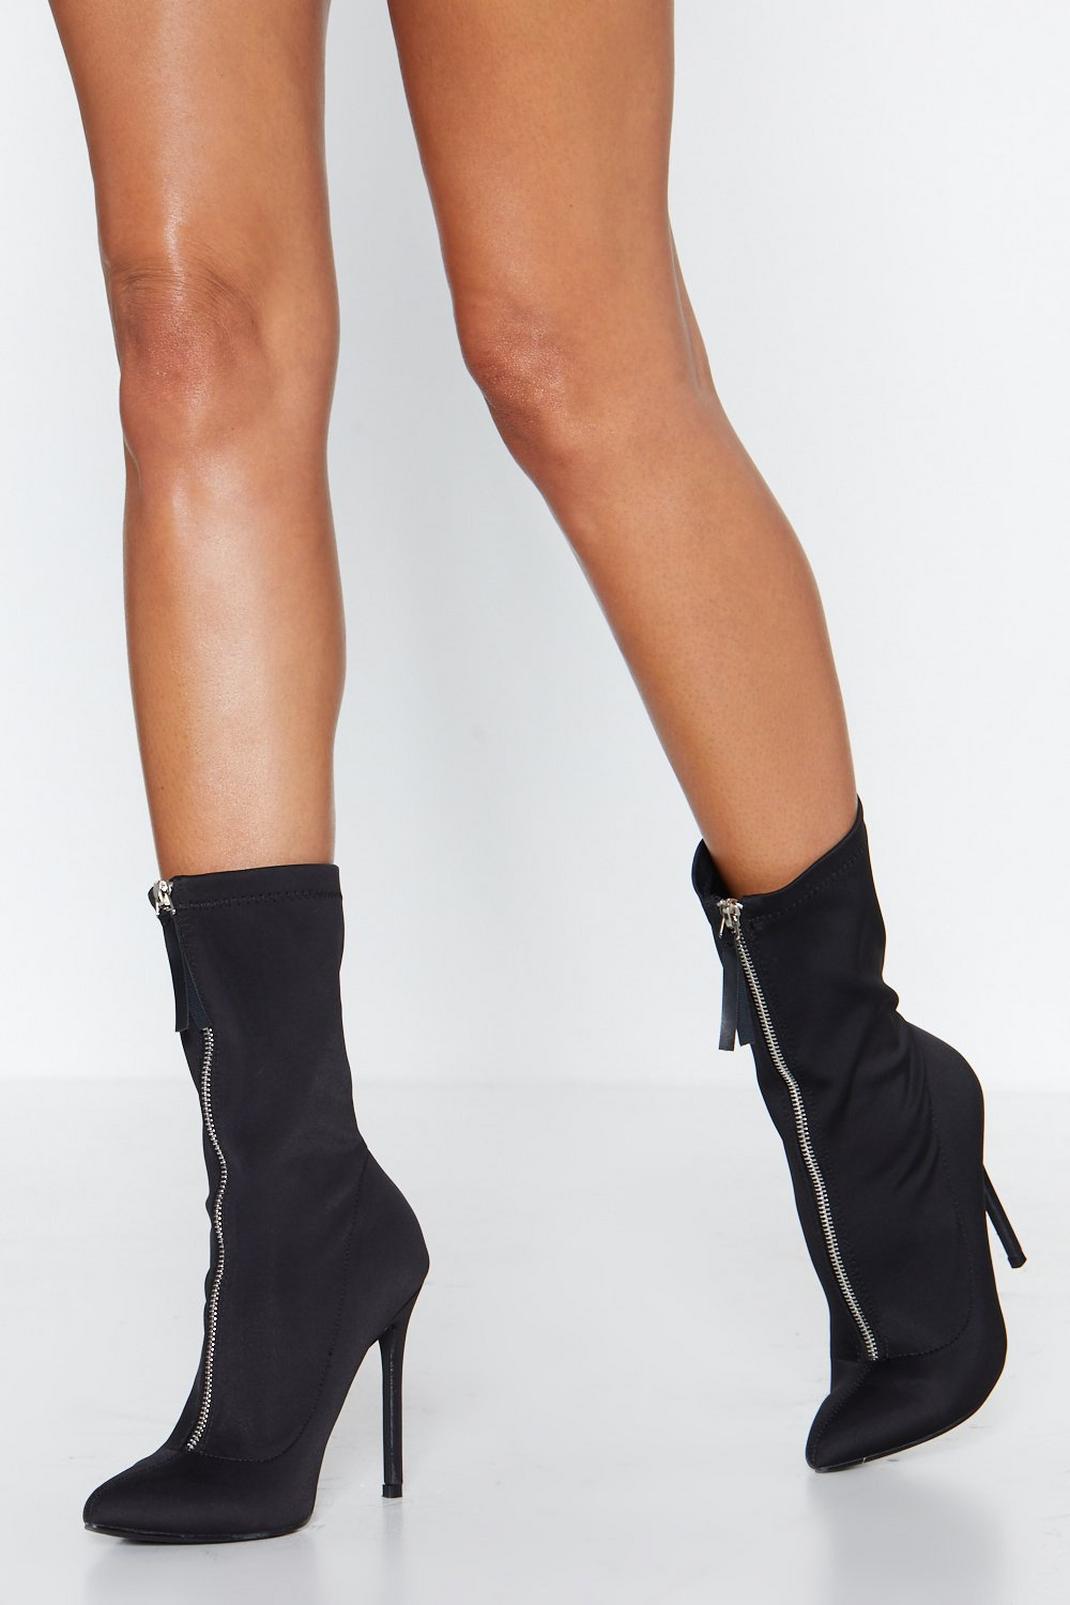 It's Zip to Be Square Sock Boot | Nasty Gal